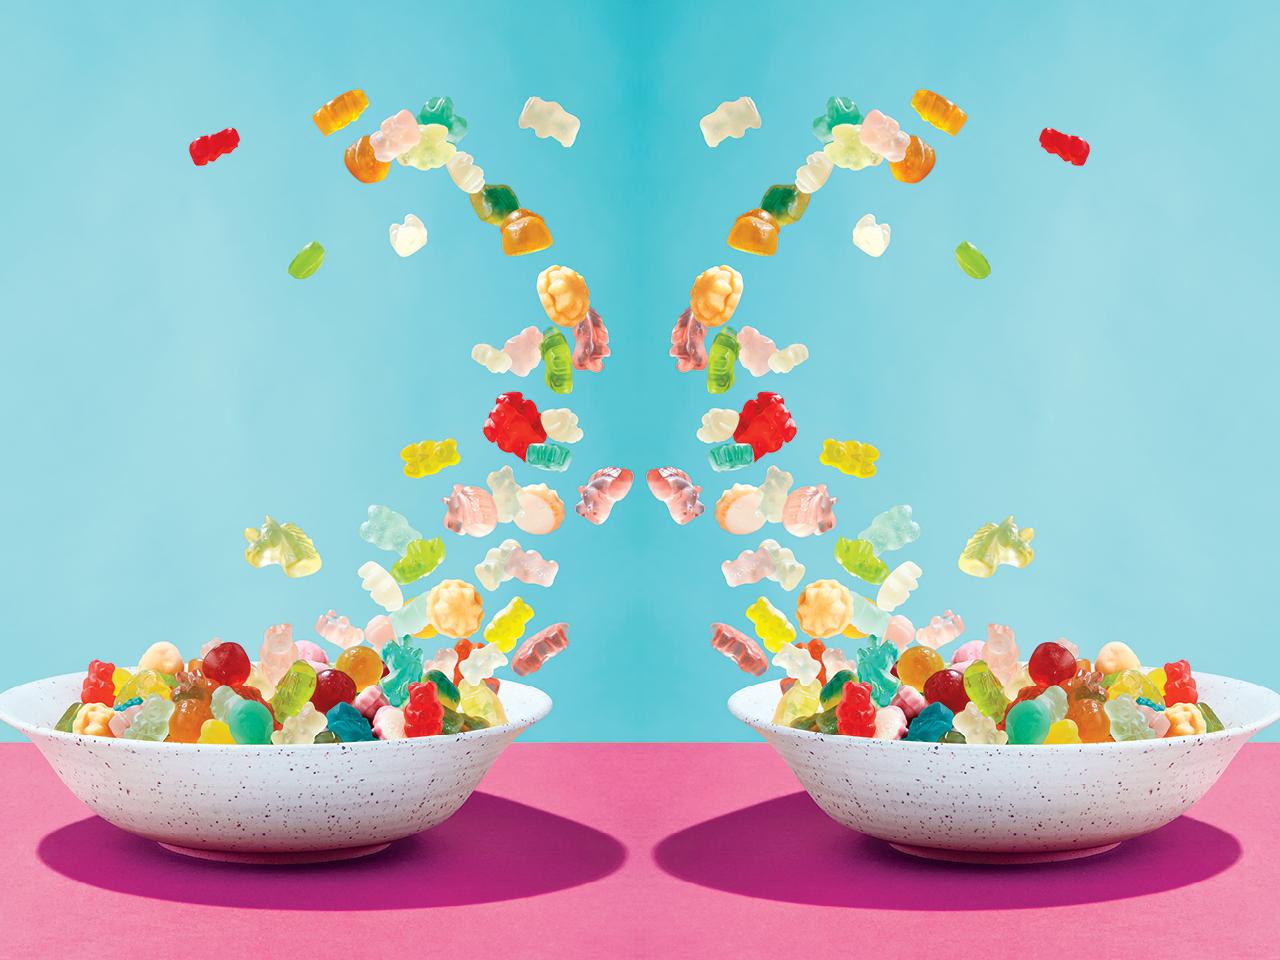 Colourful weed gummies flying out of two bowls